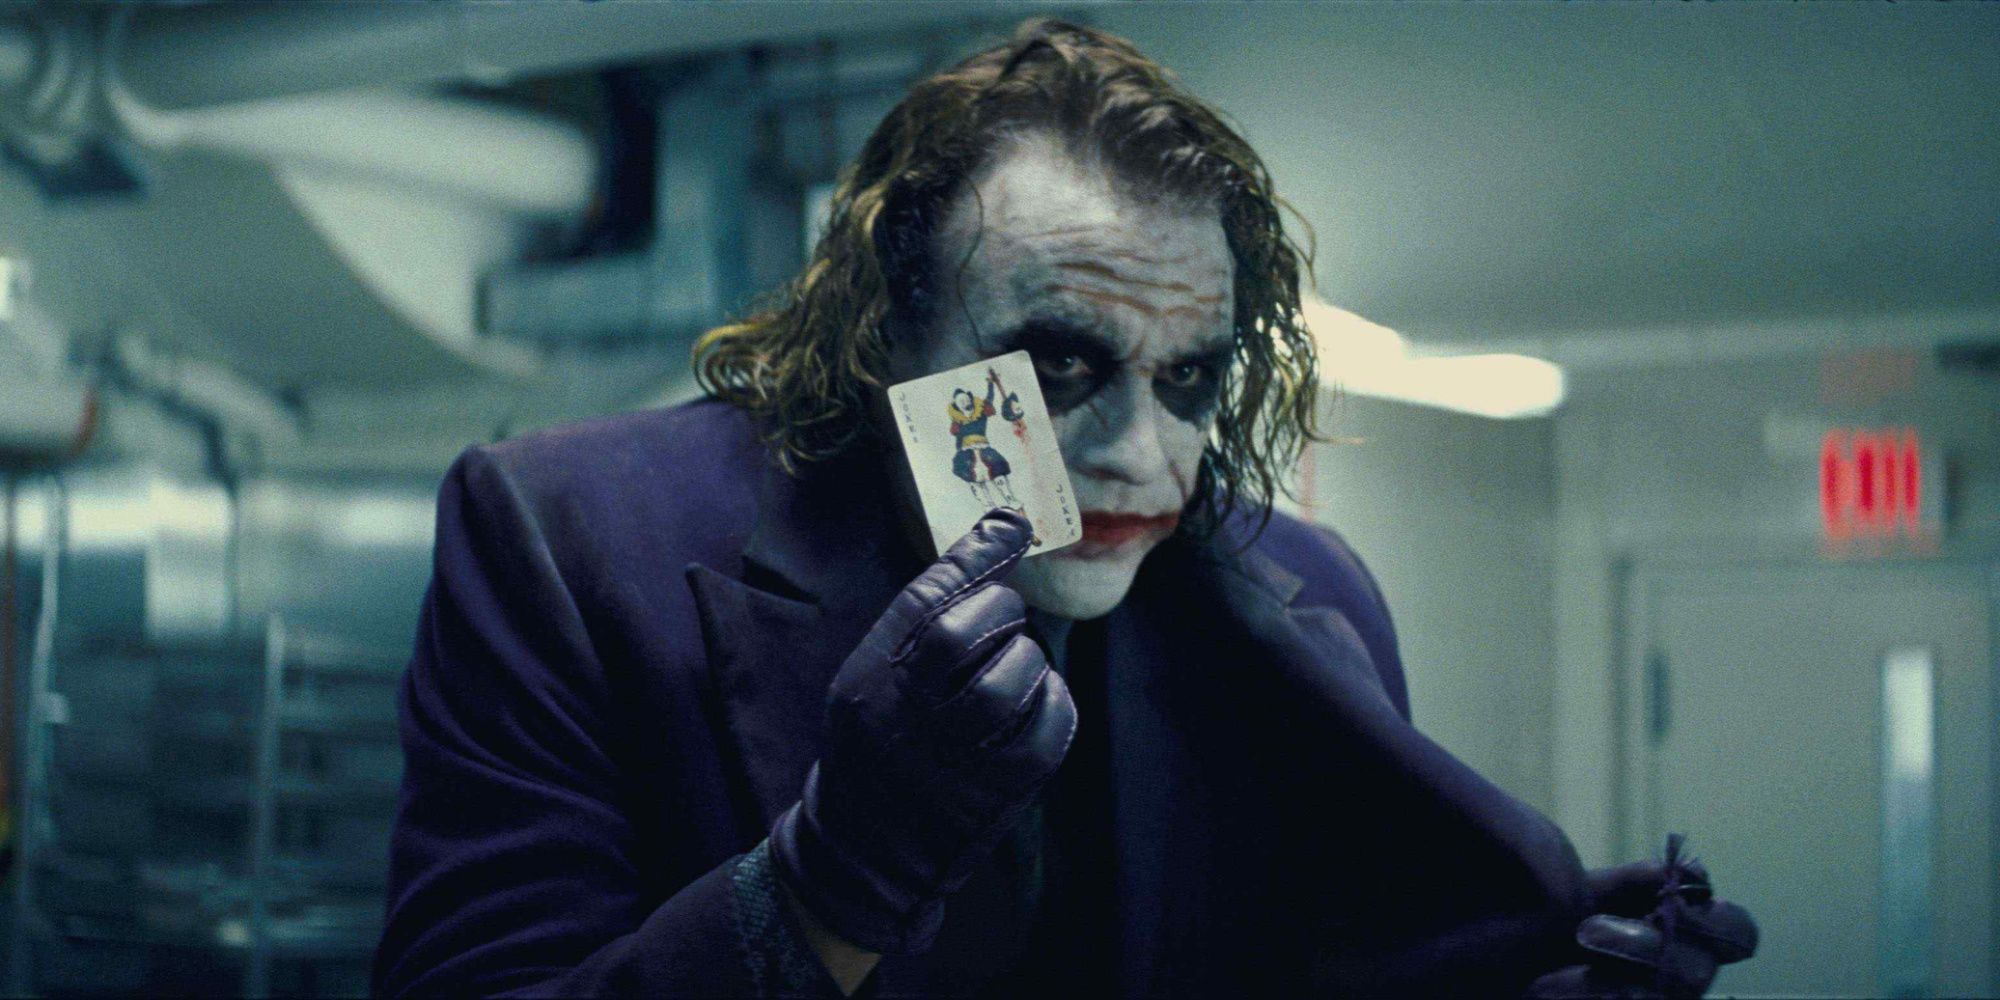 The Joker holding a card in The Dark Knight